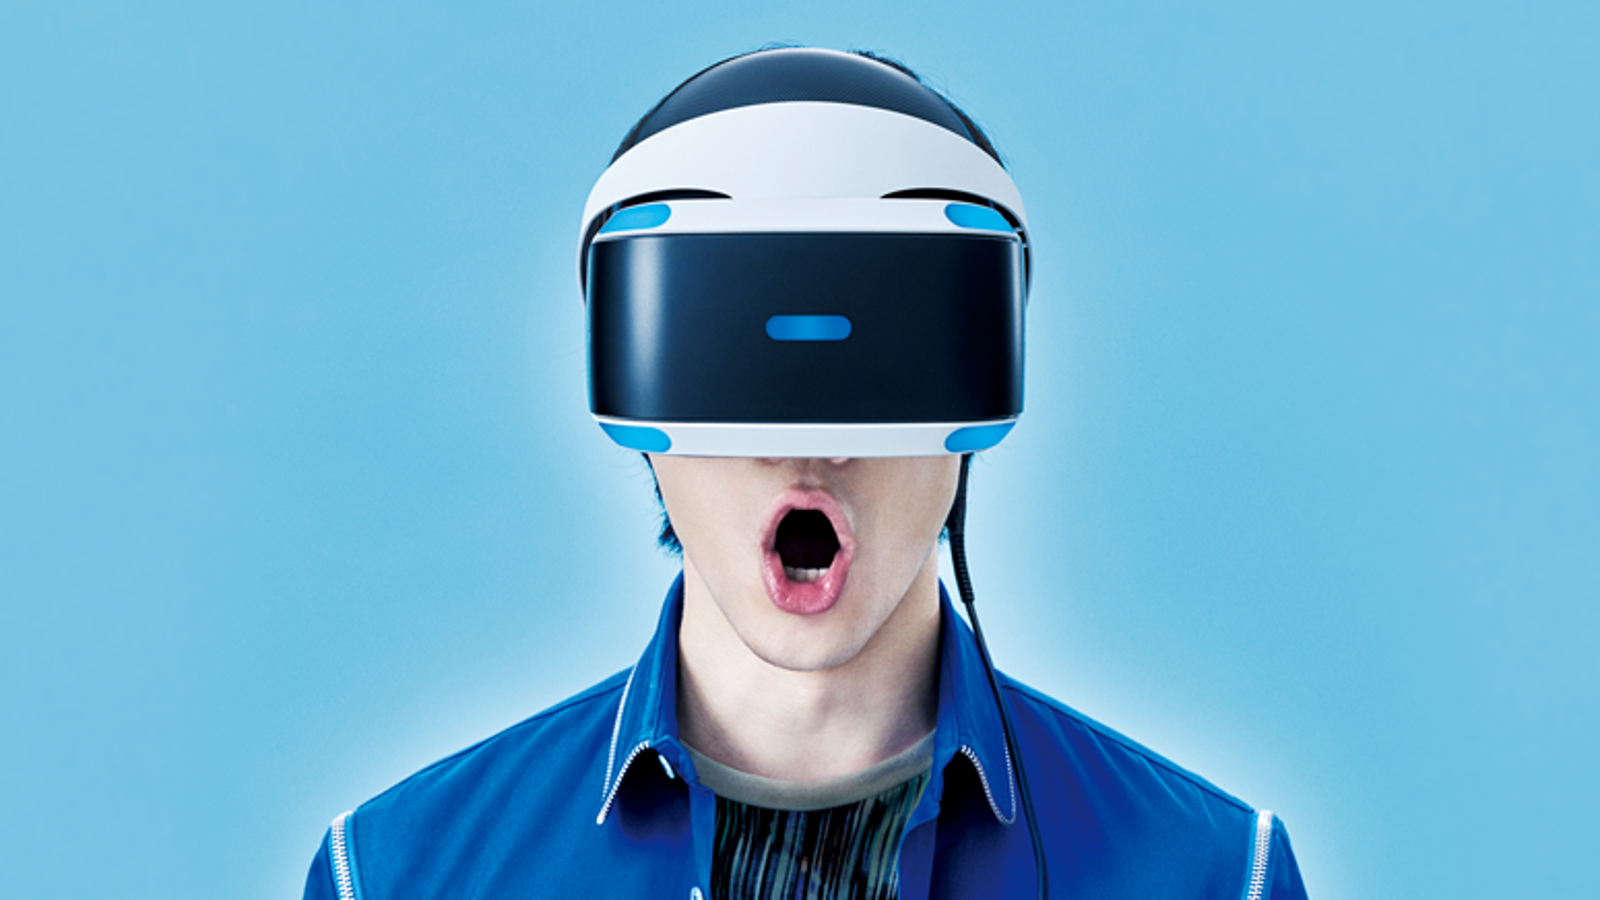 PlayStation VR Is Doing Better Than Expected Son